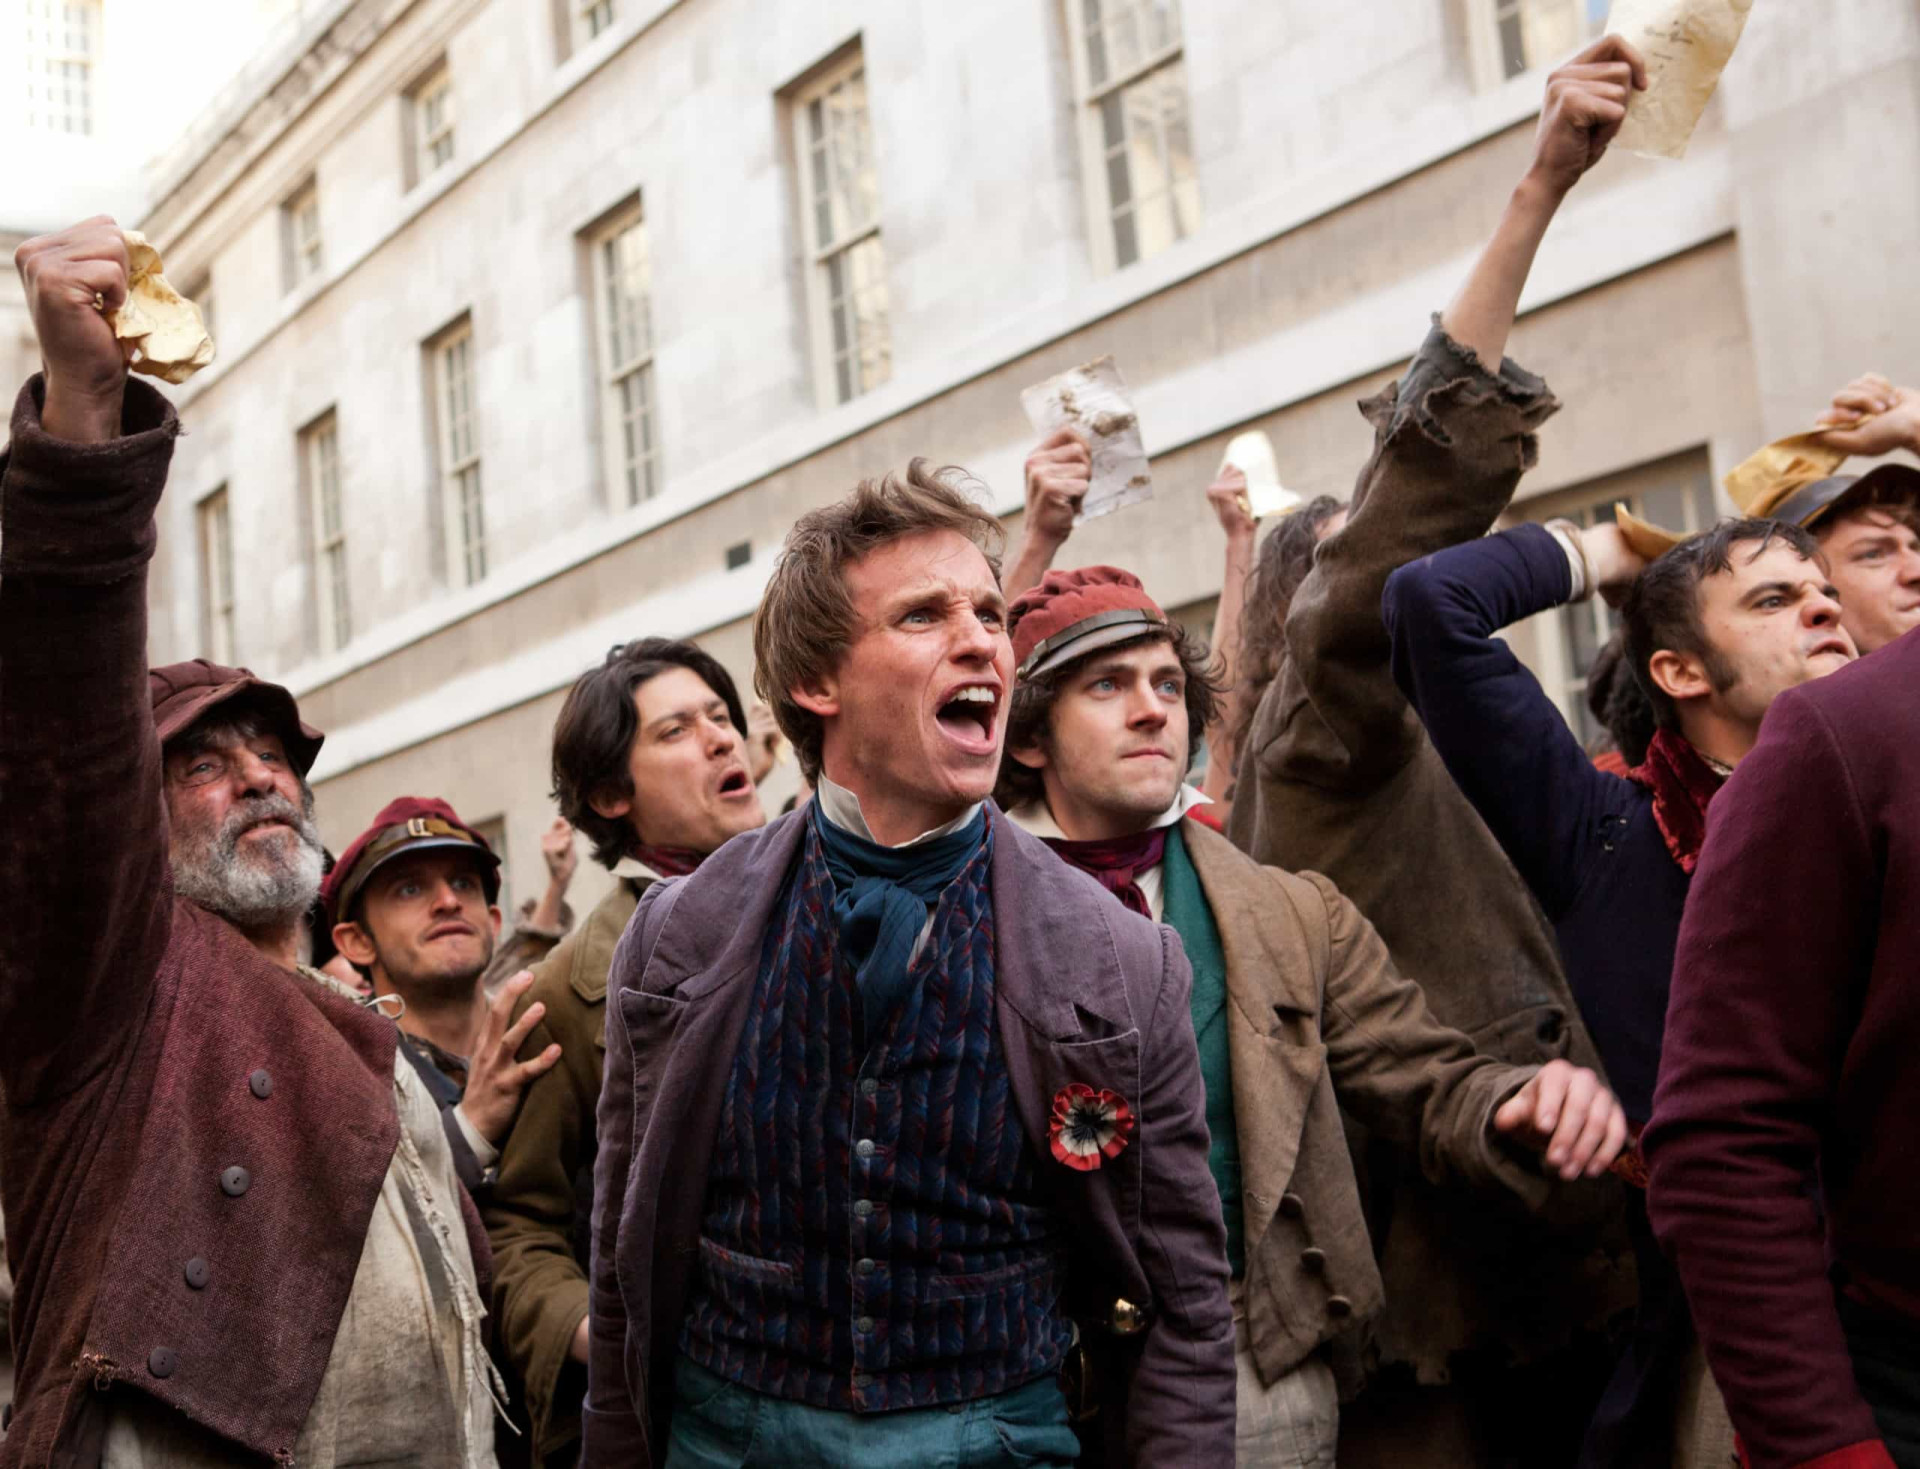 <p>It couldn't get more French than the Revolution. Based on the novel by Victor Hugo, the plot centers around the 1832 June Rebellion in Paris. It's a musical featuring major stars such as Eddie Redmayne, Hugh Jackman, and Amanda Seyfried.</p><p><a href="https://www.msn.com/en-us/community/channel/vid-7xx8mnucu55yw63we9va2gwr7uihbxwc68fxqp25x6tg4ftibpra?cvid=94631541bc0f4f89bfd59158d696ad7e">Follow us and access great exclusive content every day</a></p>